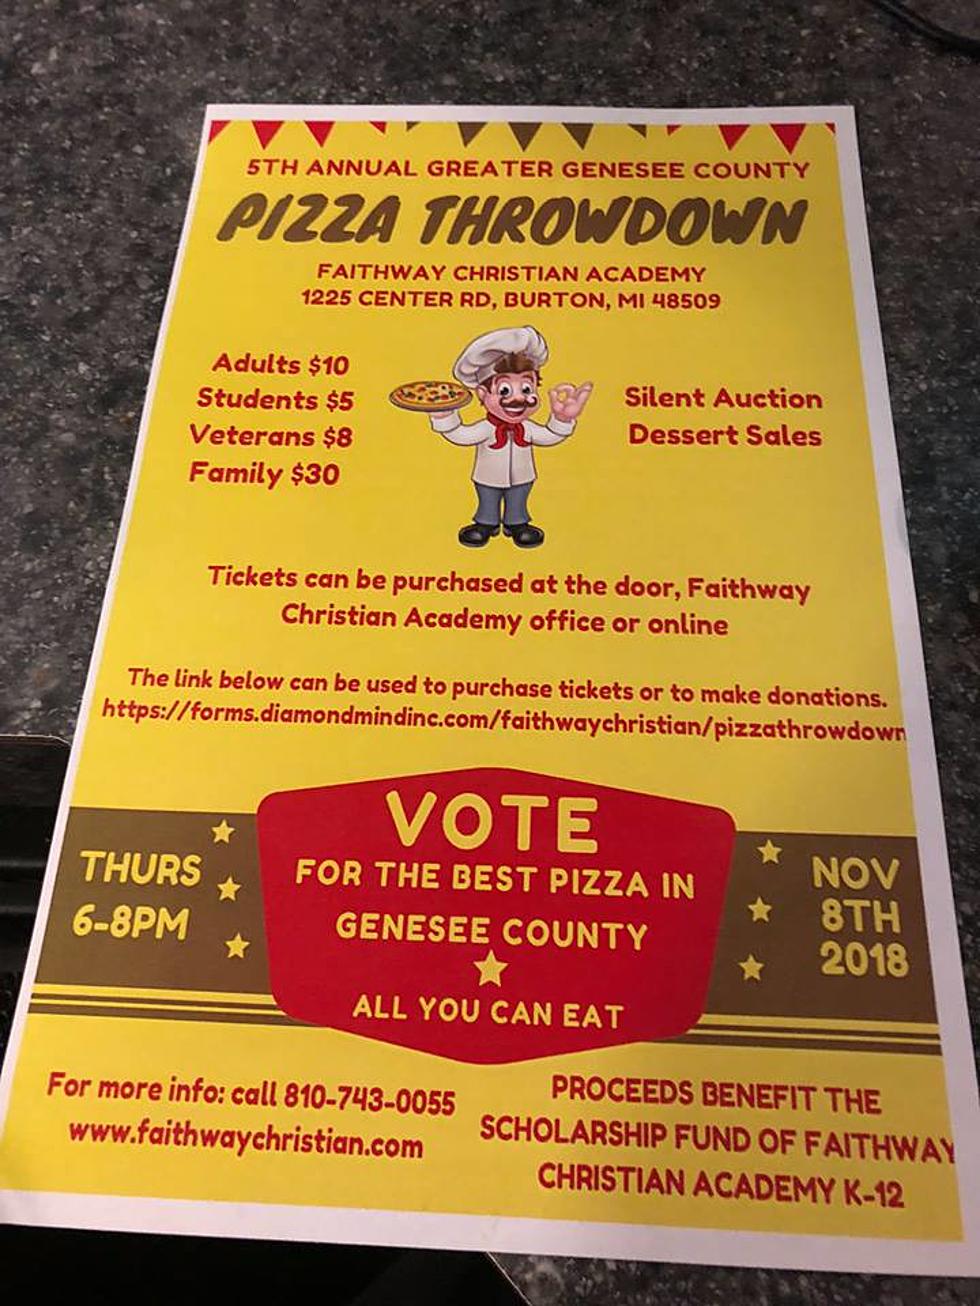 LOCAL SPOTLIGHT: Greater Genesee County Pizza Throwdown